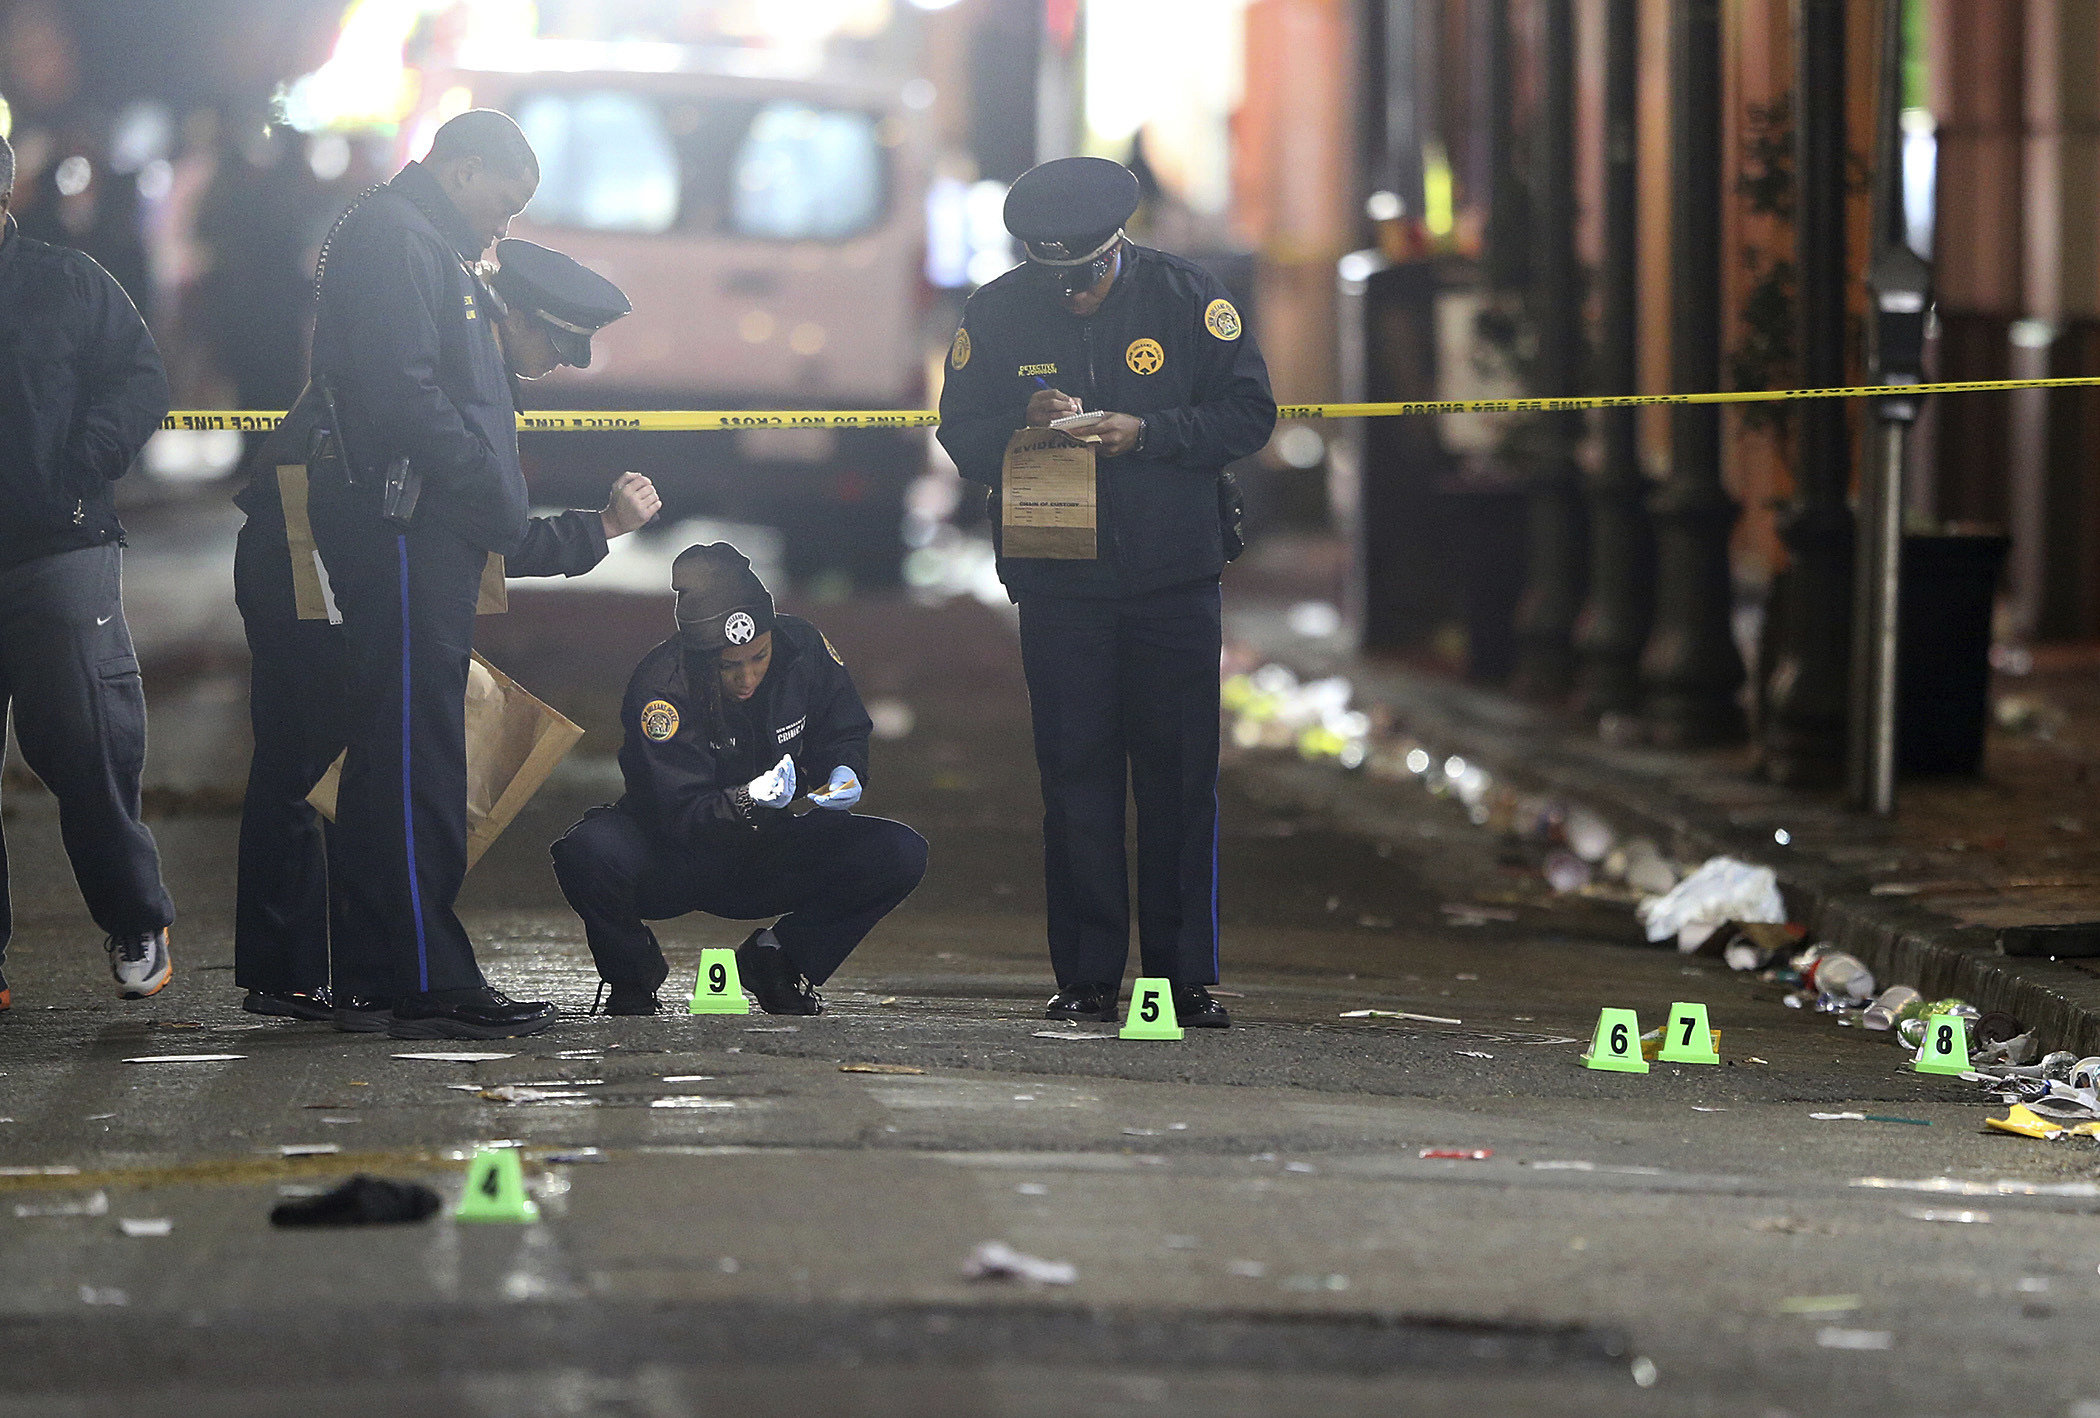 New Orleans Police investigate a fatal shooting at Iberville and Bourbon streets on Nov. 27, 2016. (Michael DeMocker—AP)